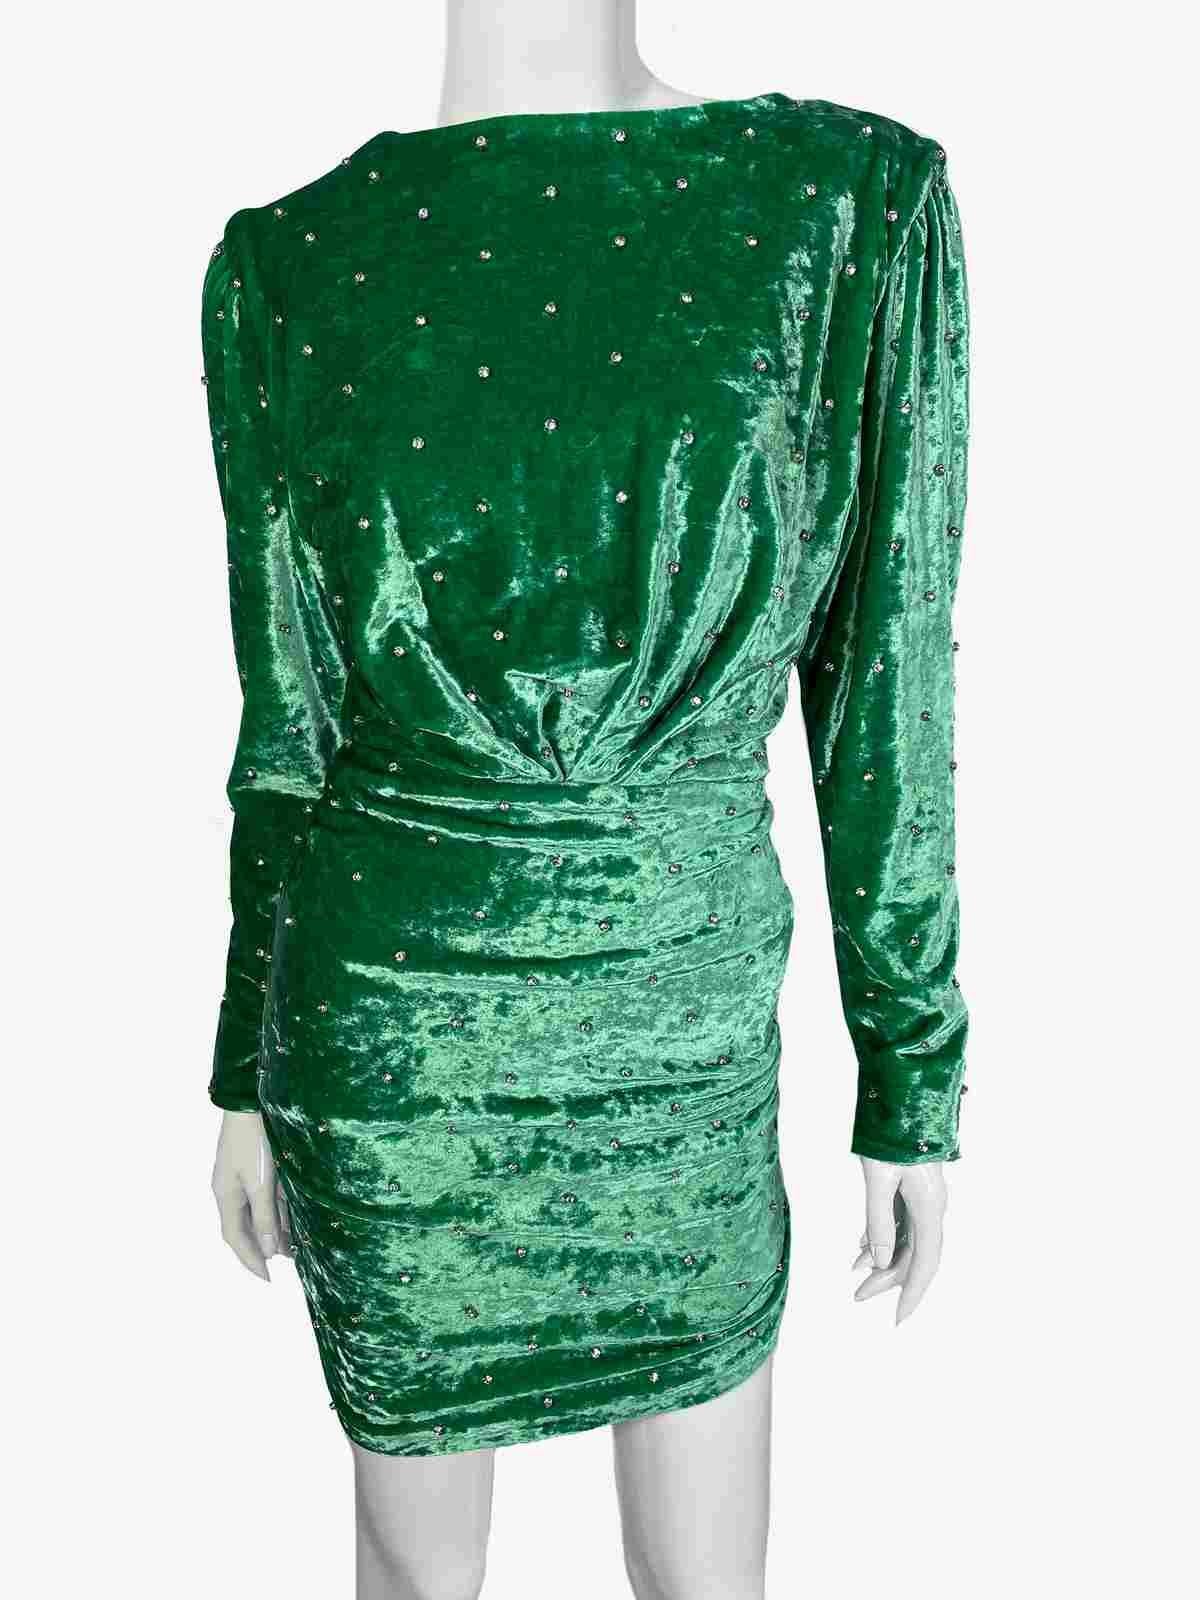 Attico velvet dress embelished with rhinestones. V-shape low cut. The dress is reversible, the neckline can be worn on both sides. 
Collection 2020. 
Fabric: 69% viscosa, 28% polyamide, 3% elastane
Size: 38/M
Condition: never worn.